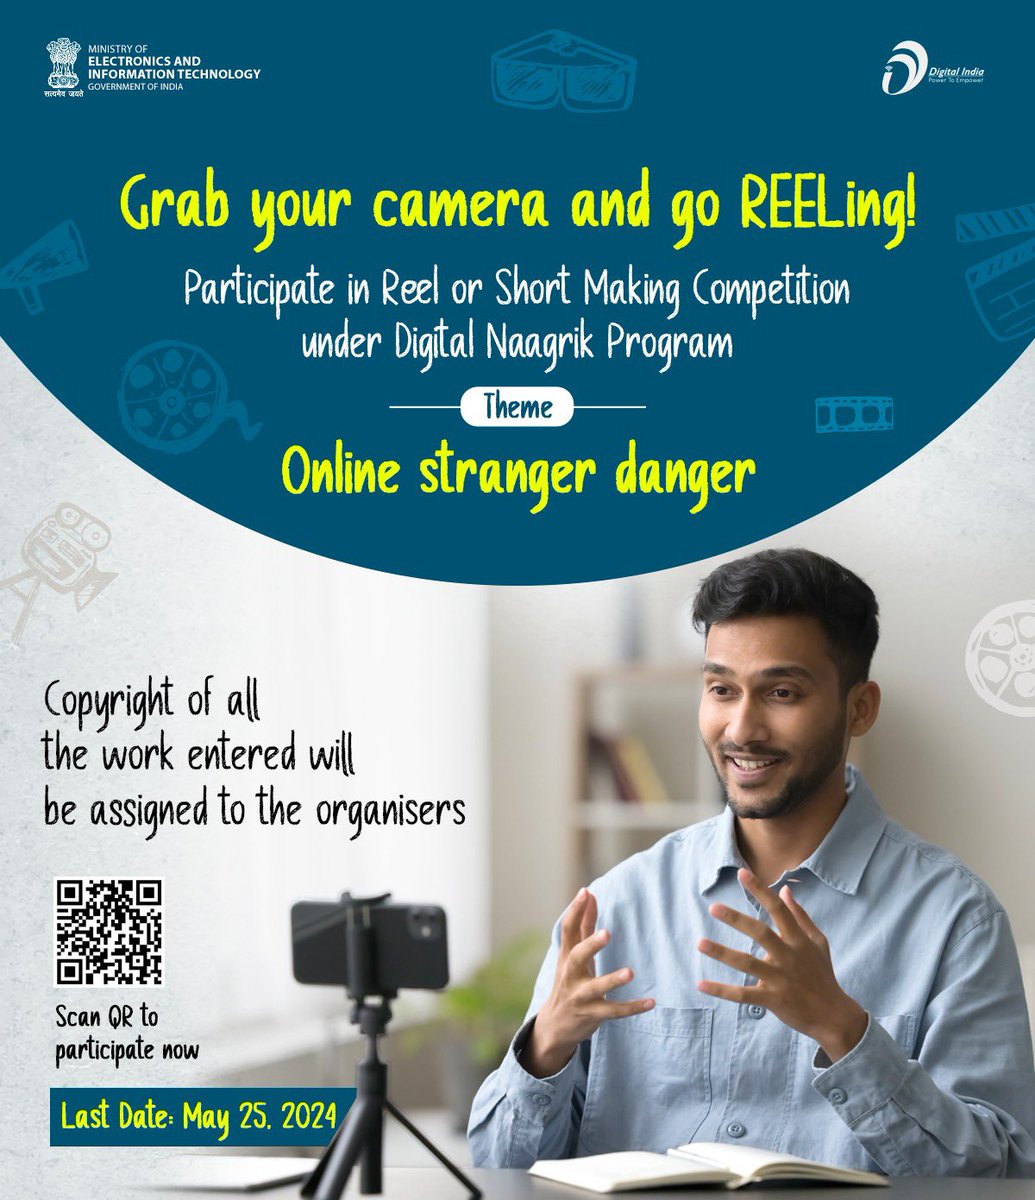 Are you a content creator? Participate in the Digital Naagrik Programme’s reels & youtube shorts making competition to explore your creativity with #cybersecurity. #DigitalIndia #cybersurakshitbharat @InfoSecAwa